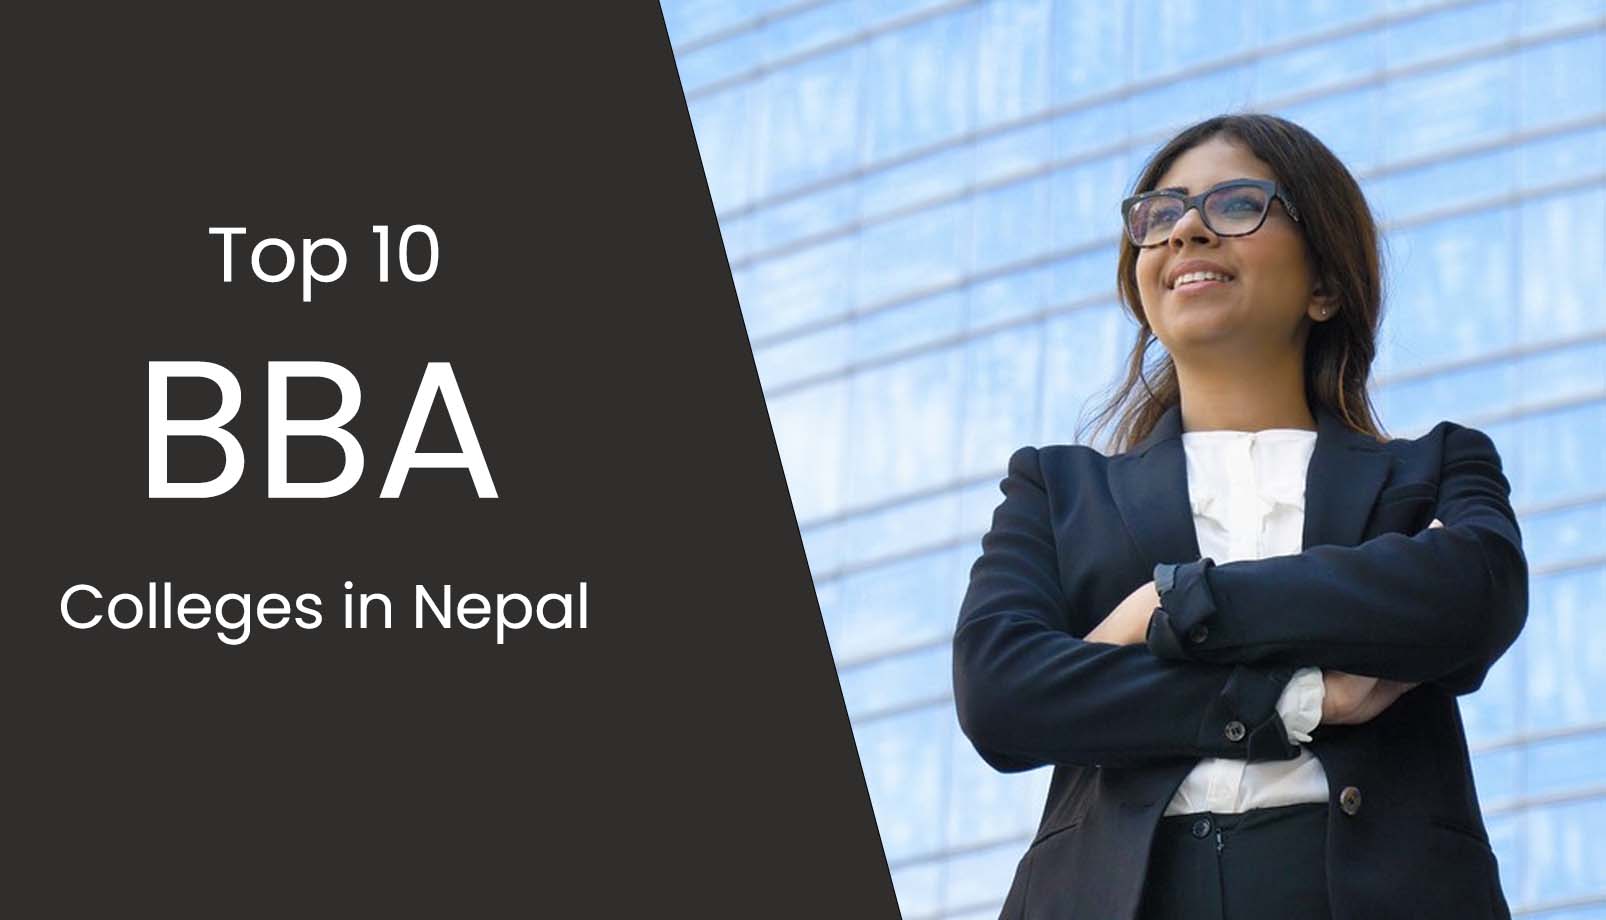 Top 10 BBA Colleges in Nepal